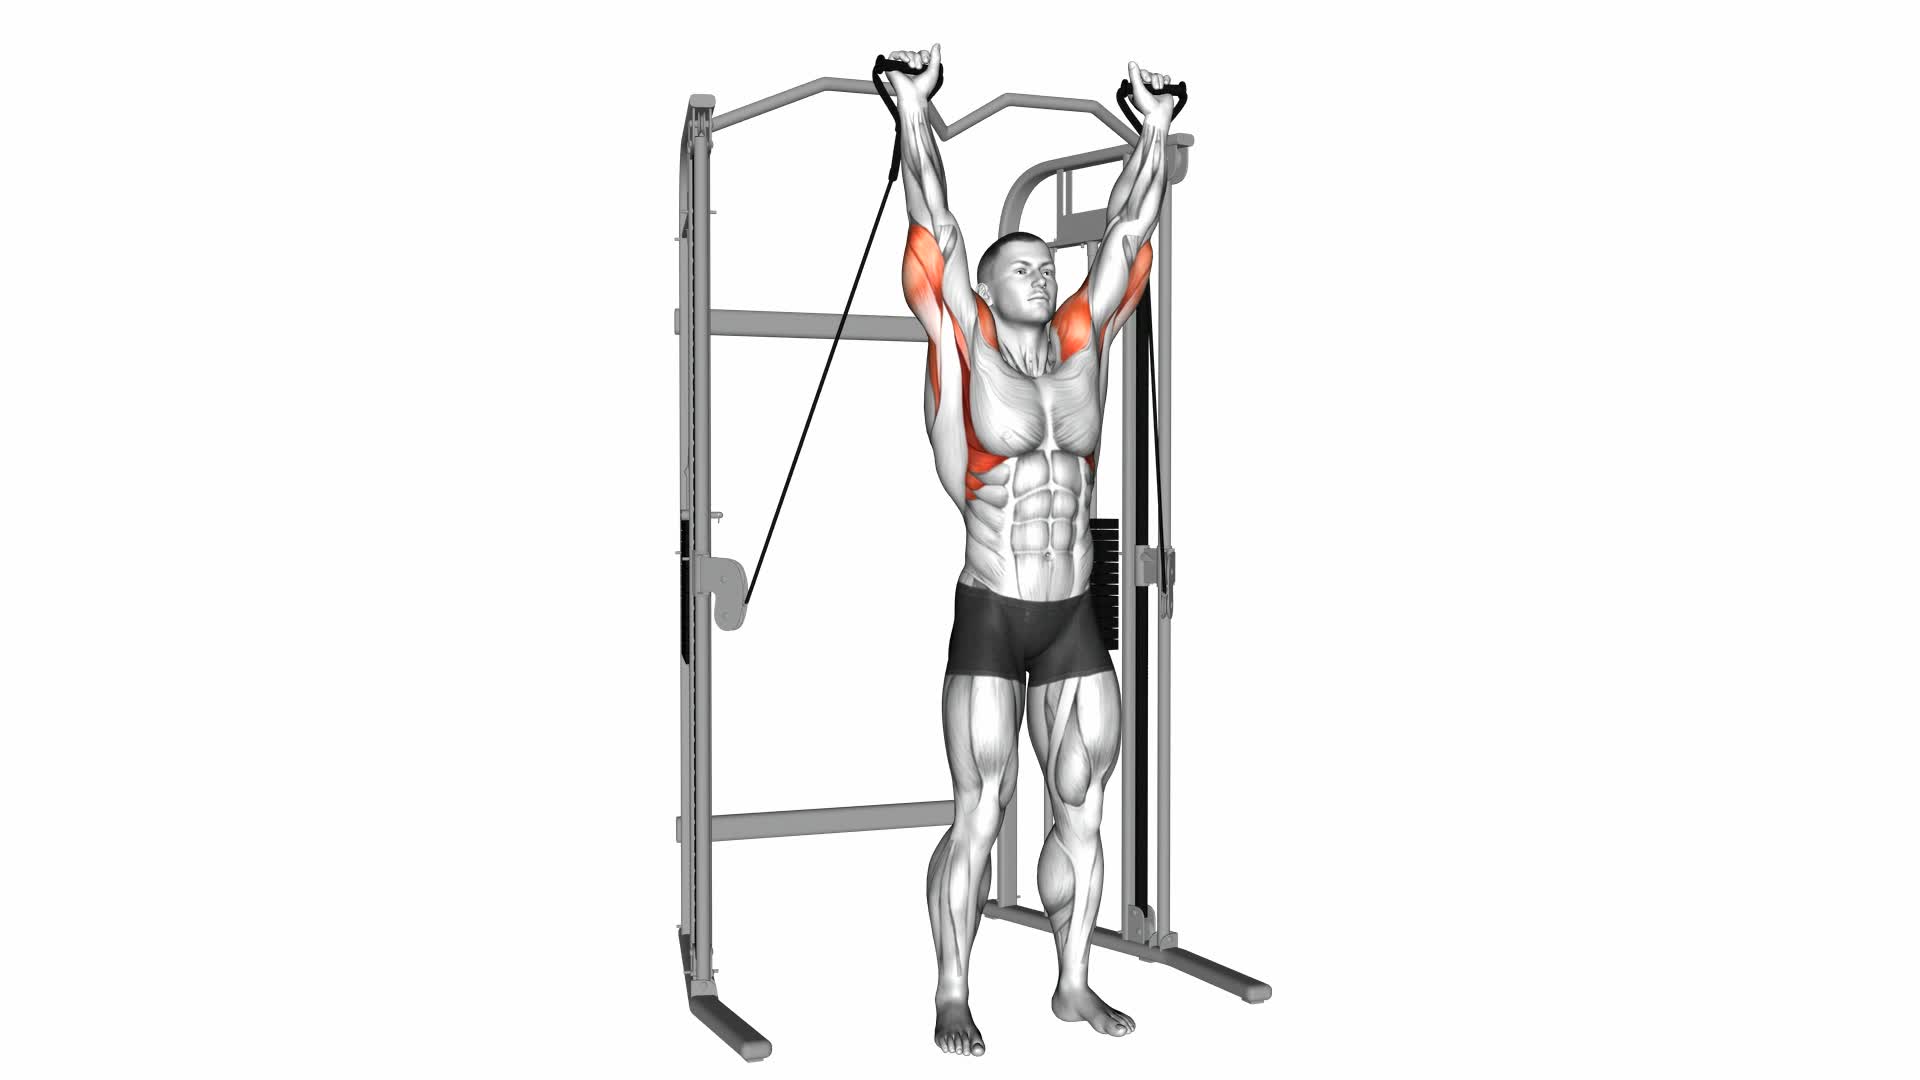 Cable Shoulder Press - Video Exercise Guide & Tips